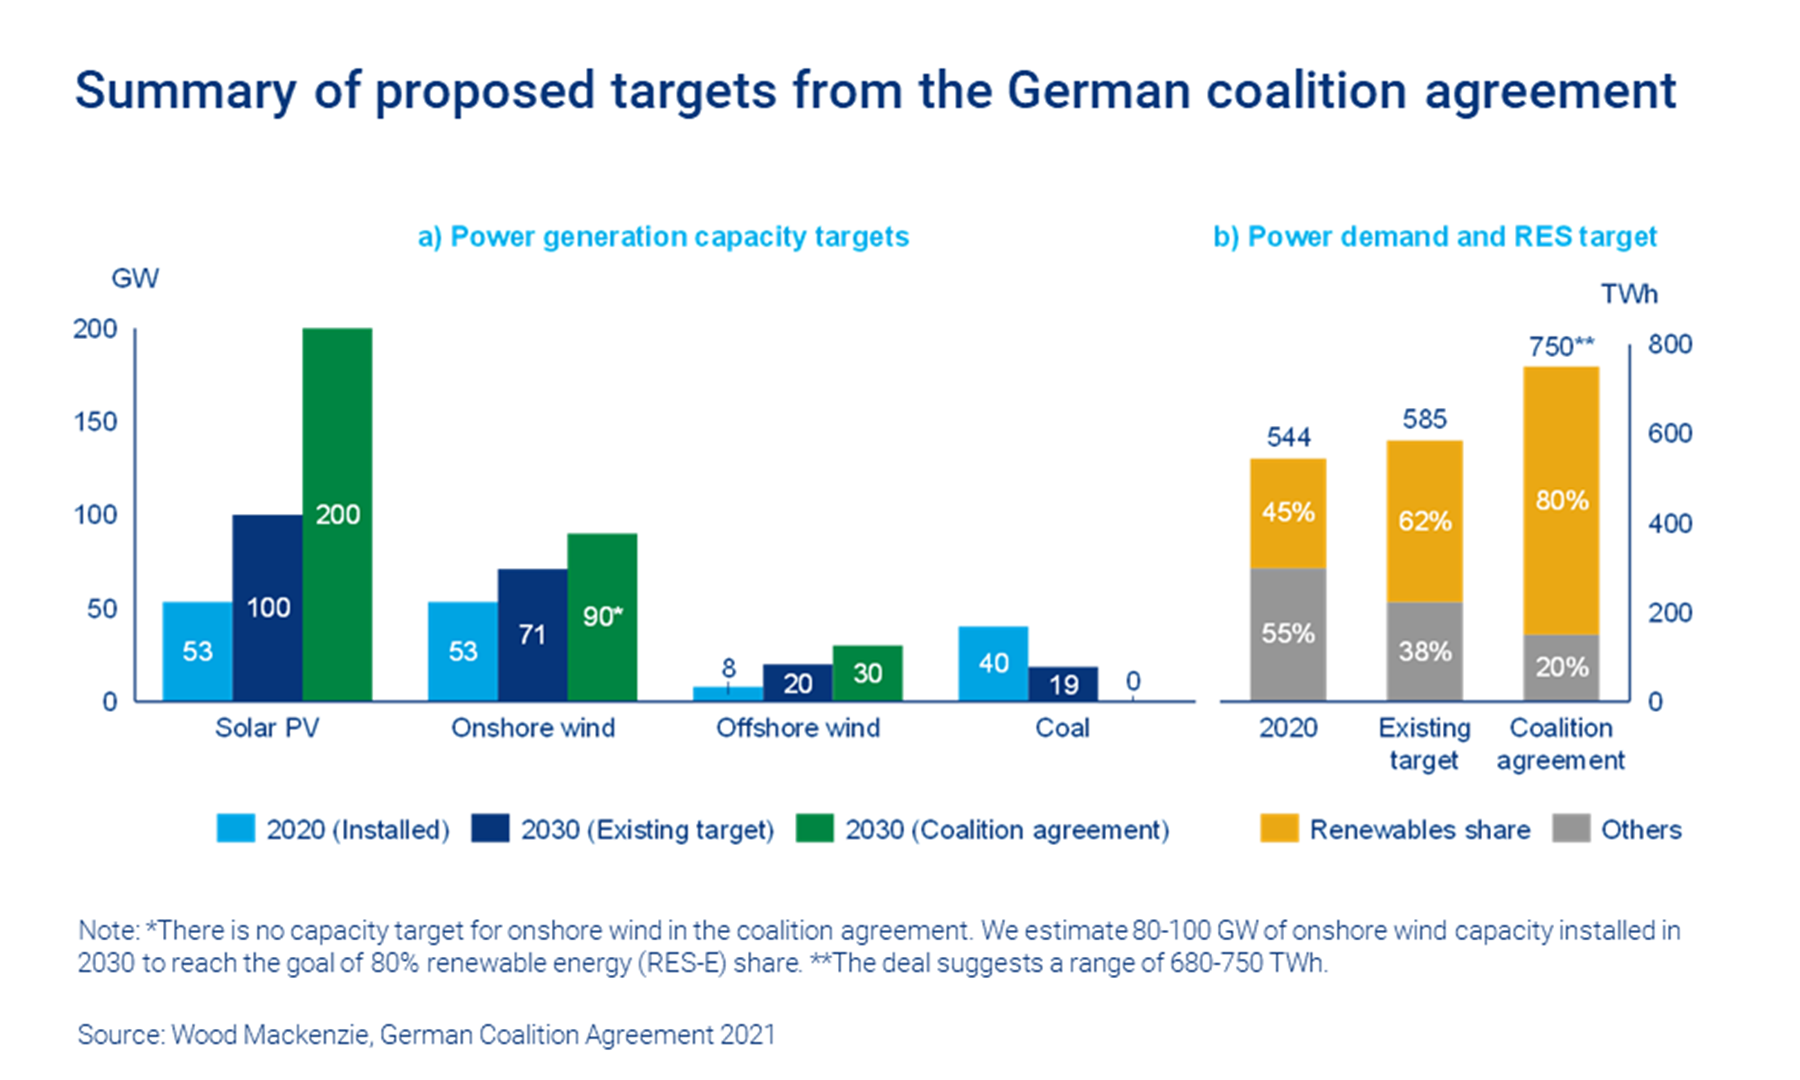 Germany's greenhouse gas emissions and energy transition targets